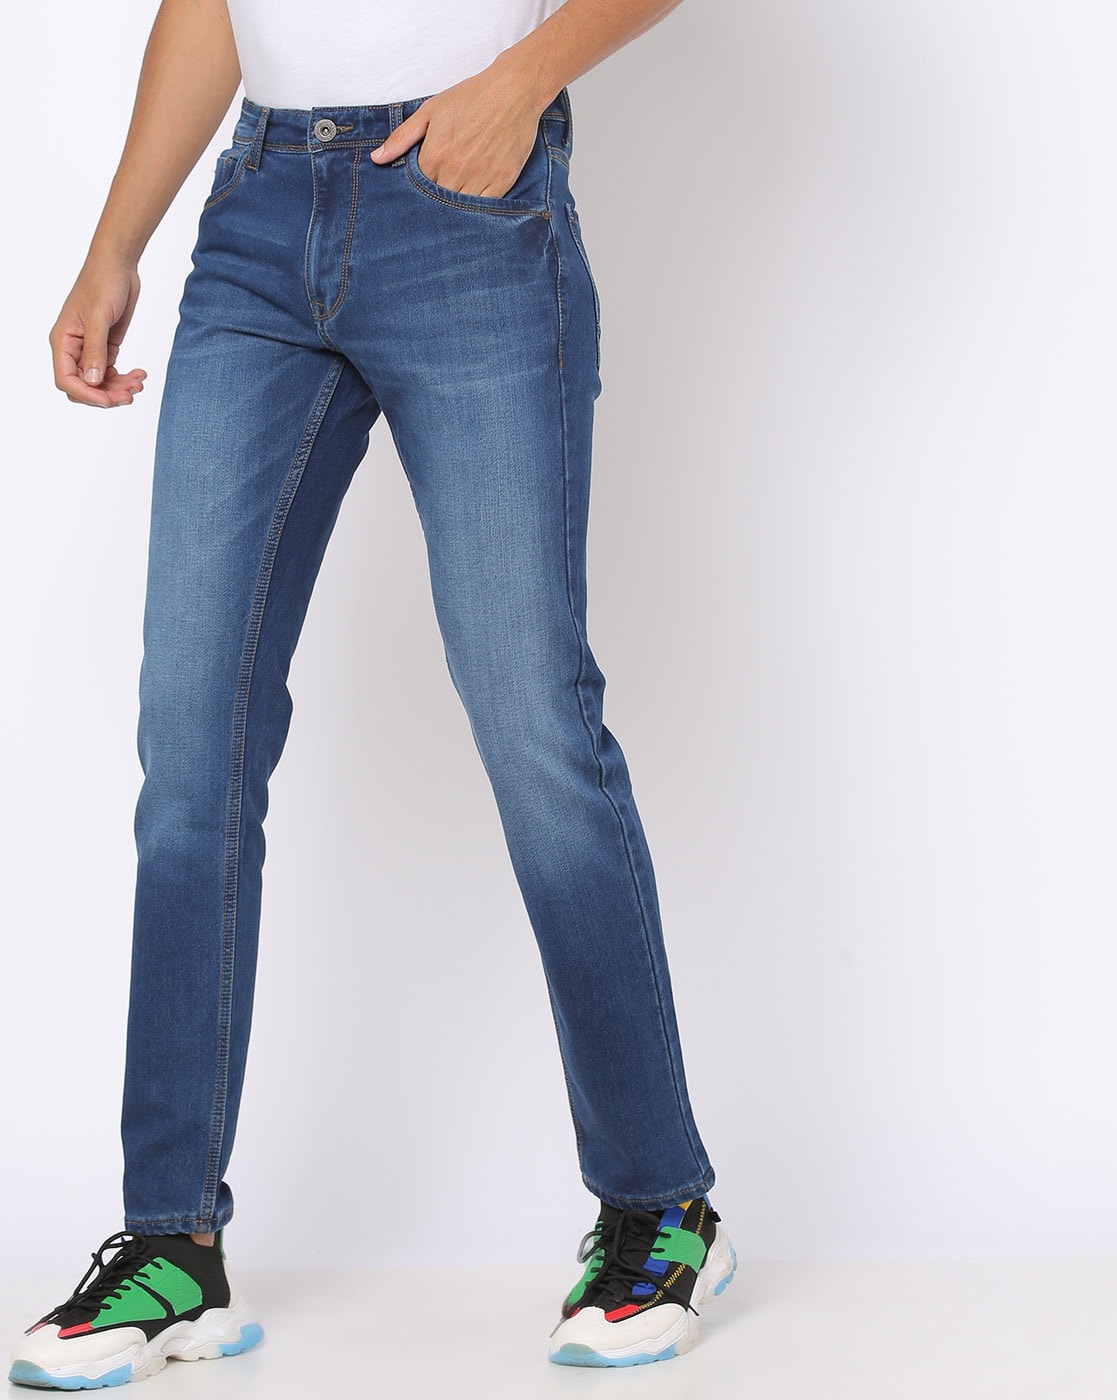 Top 5 Denim Brands & Every Cool Pair of Jeans Worth Buying – Fashion Steele  NYC